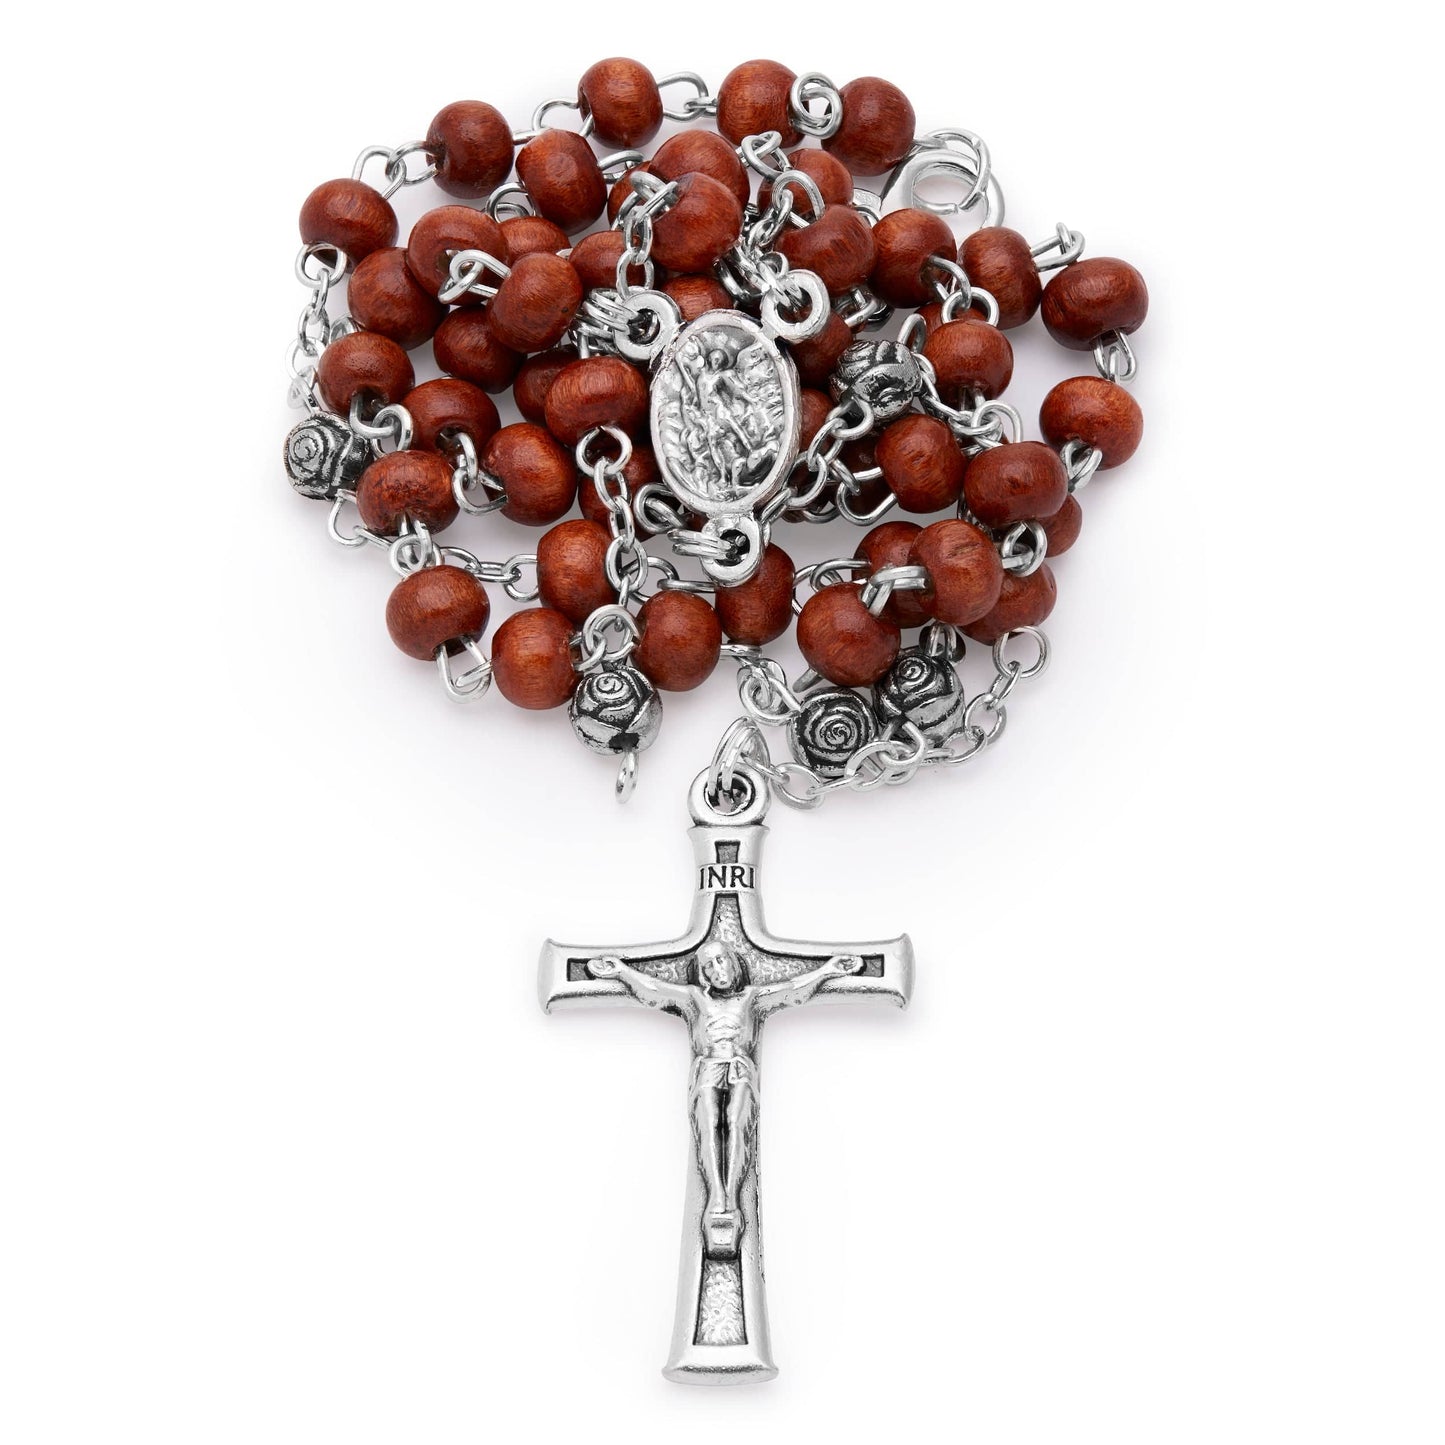 MONDO CATTOLICO 38 cm (15 in) / 4 mm (0.15 in) St. Michael rosary in wood with Case